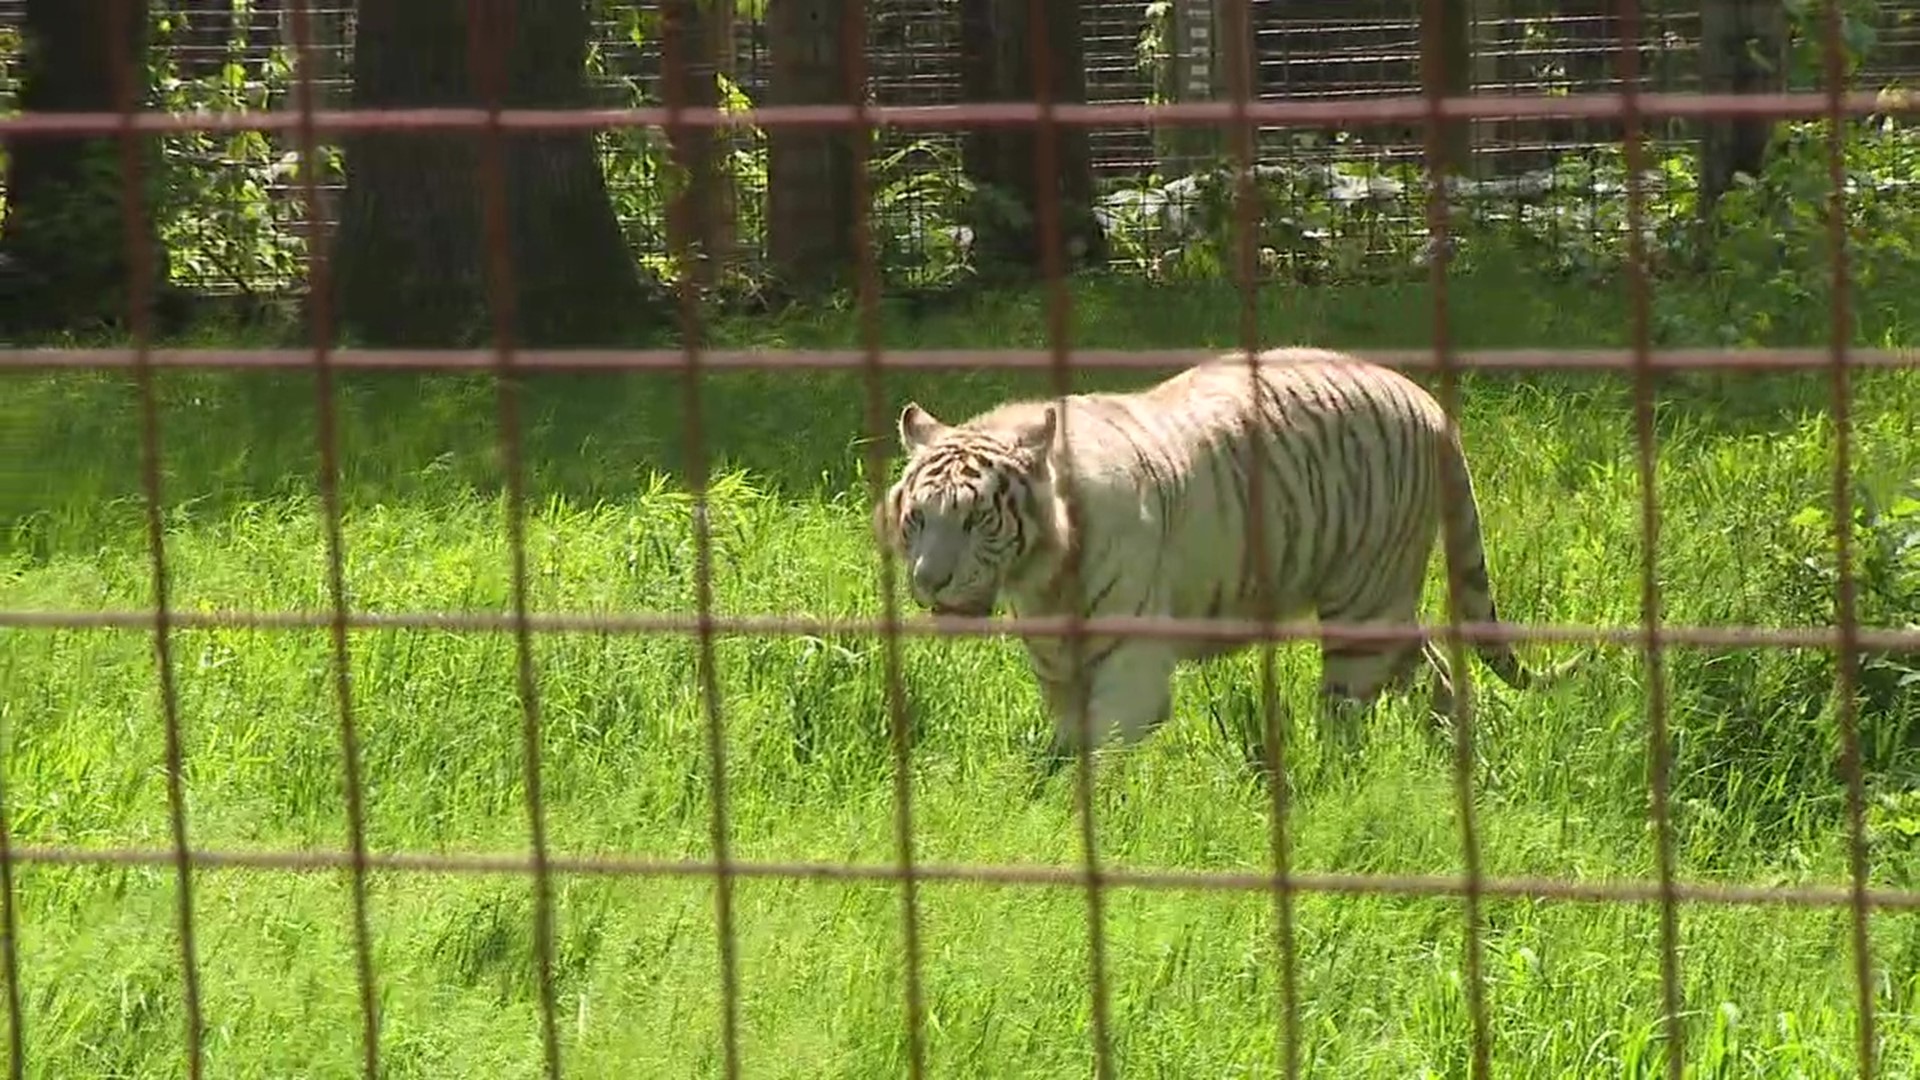 It was recently moving day for a group of tigers at T & D's Cats of the World.